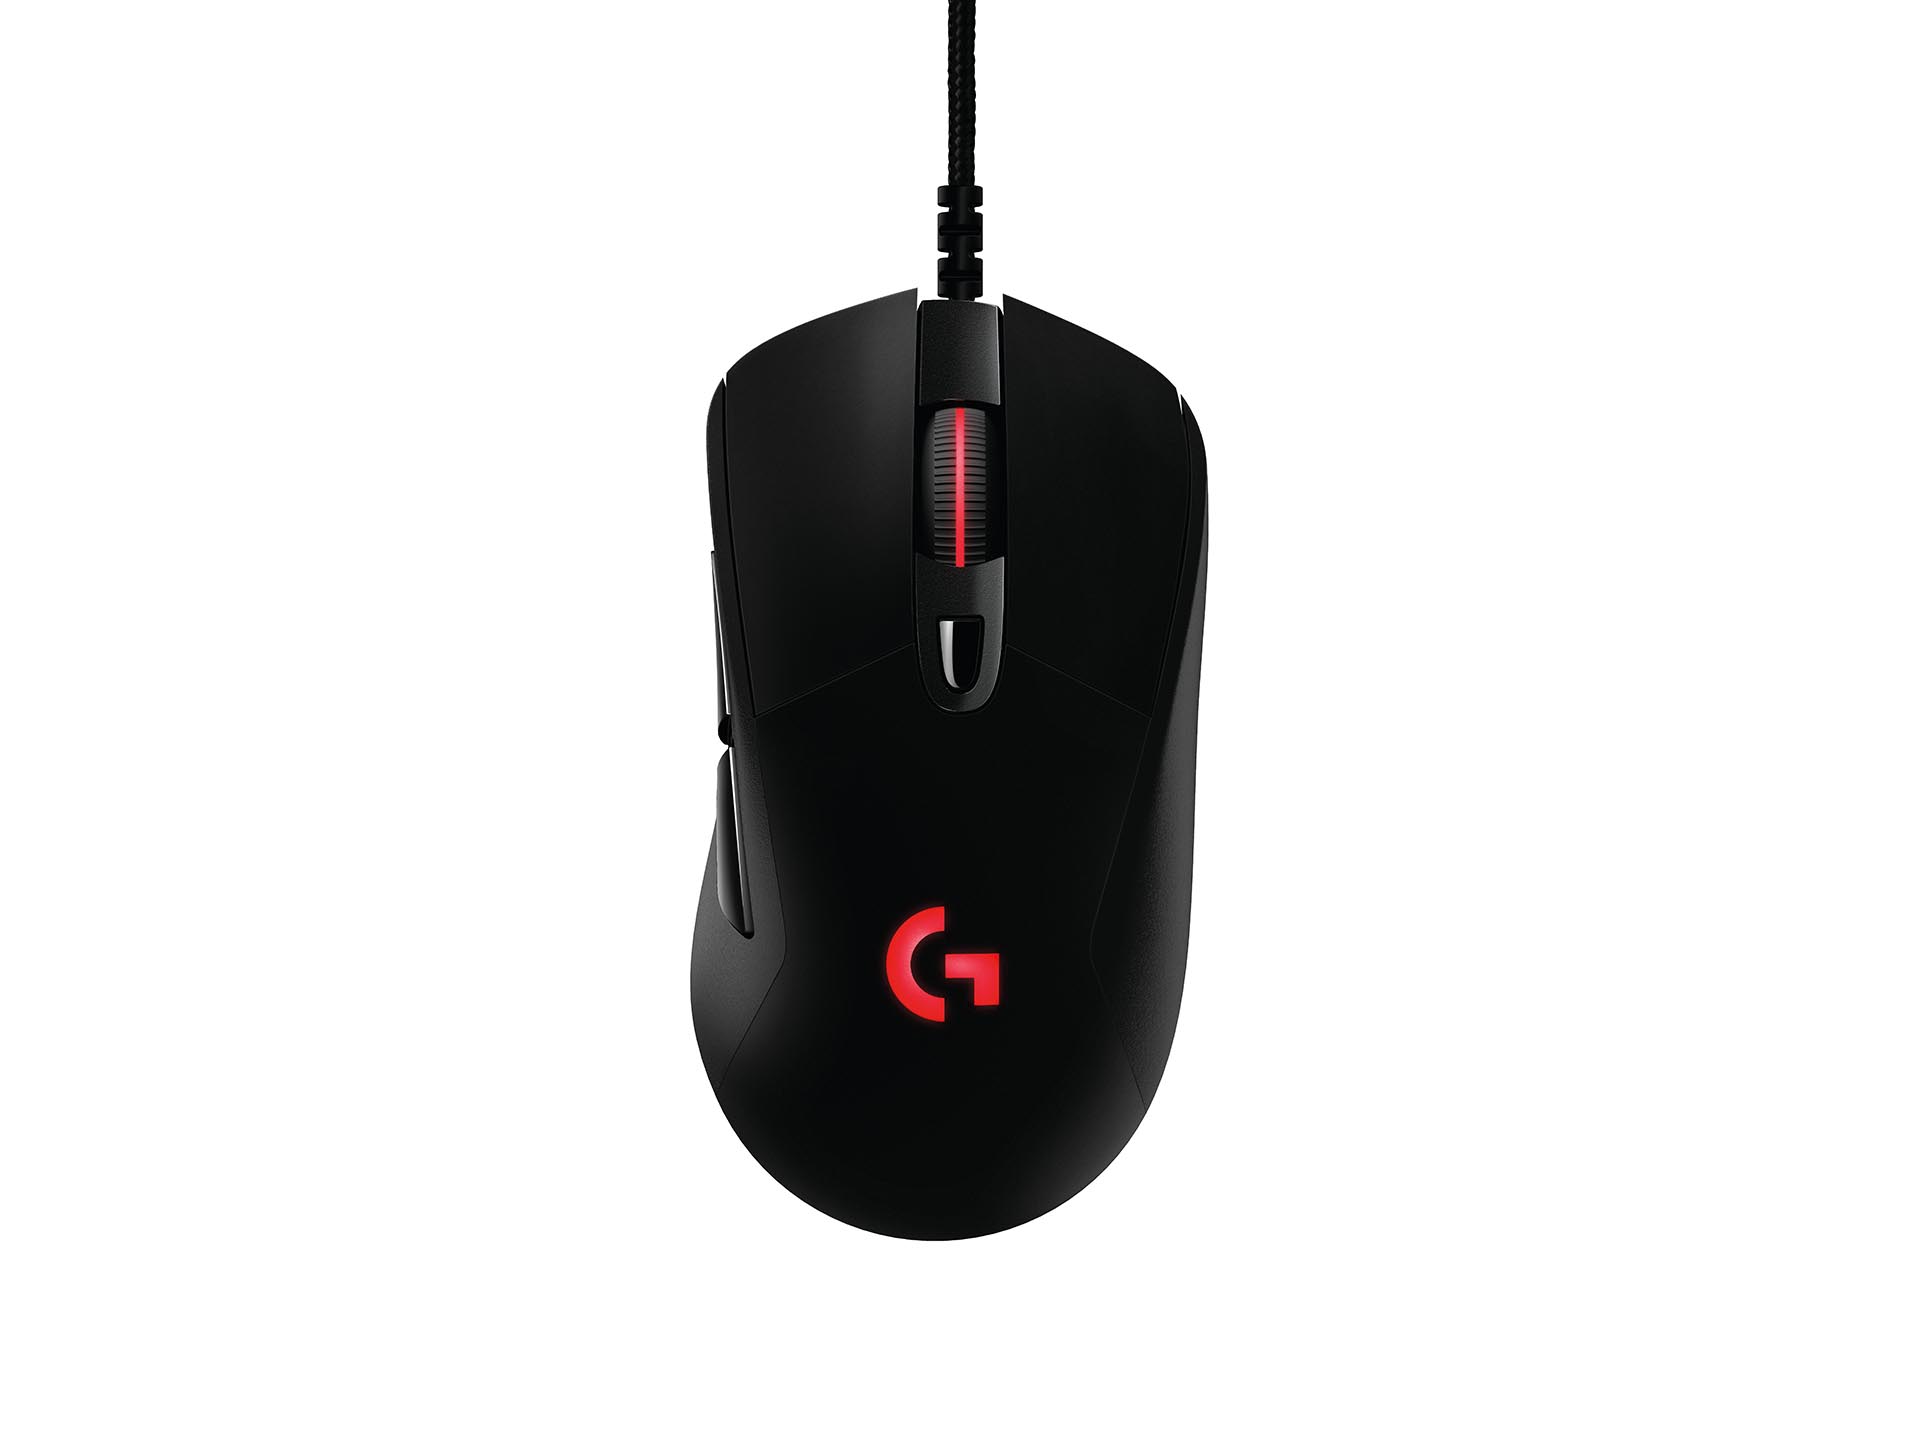 JPG-300-dpi-_RGB_-G403-Prodigy-Gaming-Mouse-TOP-RGB-RED-wired